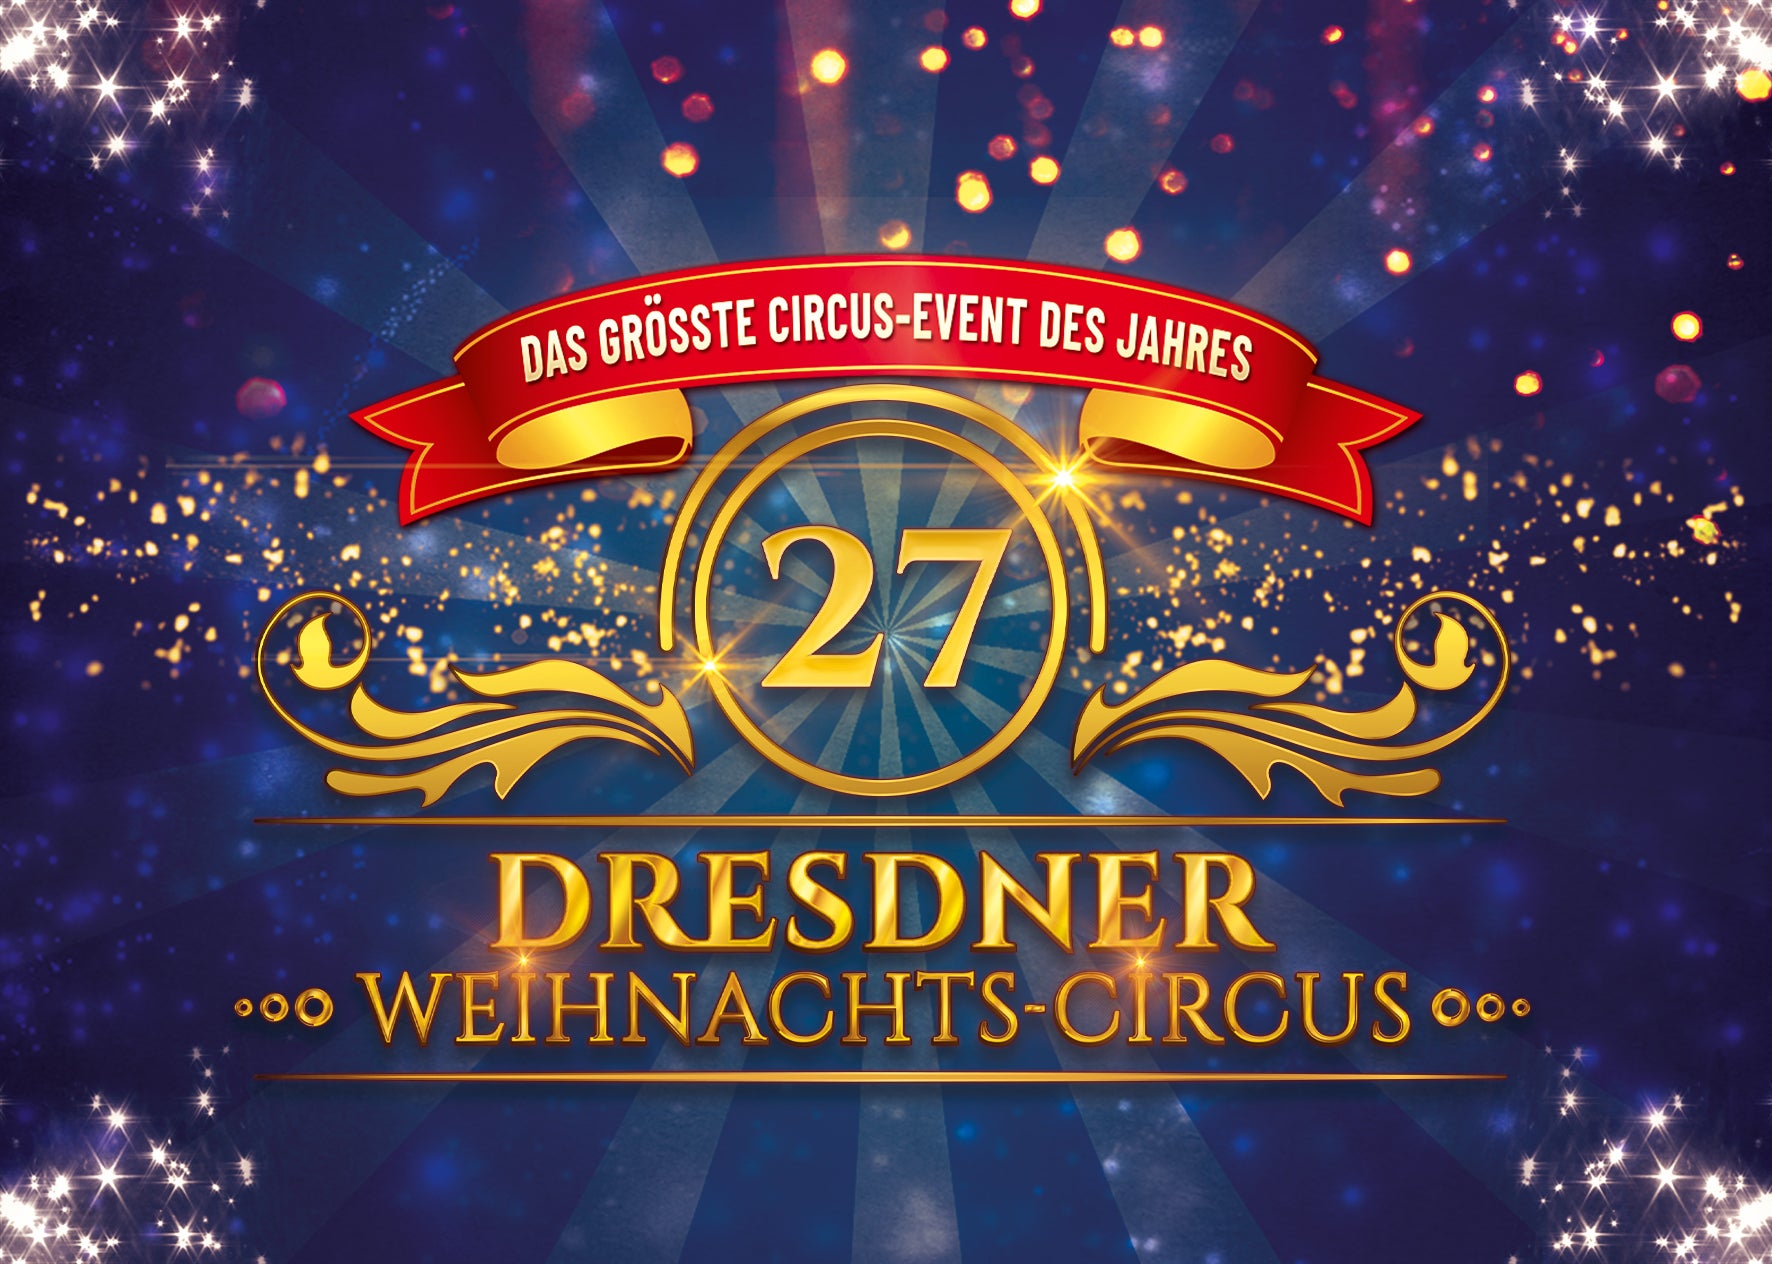 Dresdner Weihnachts-Circus - Nachmittags-Show